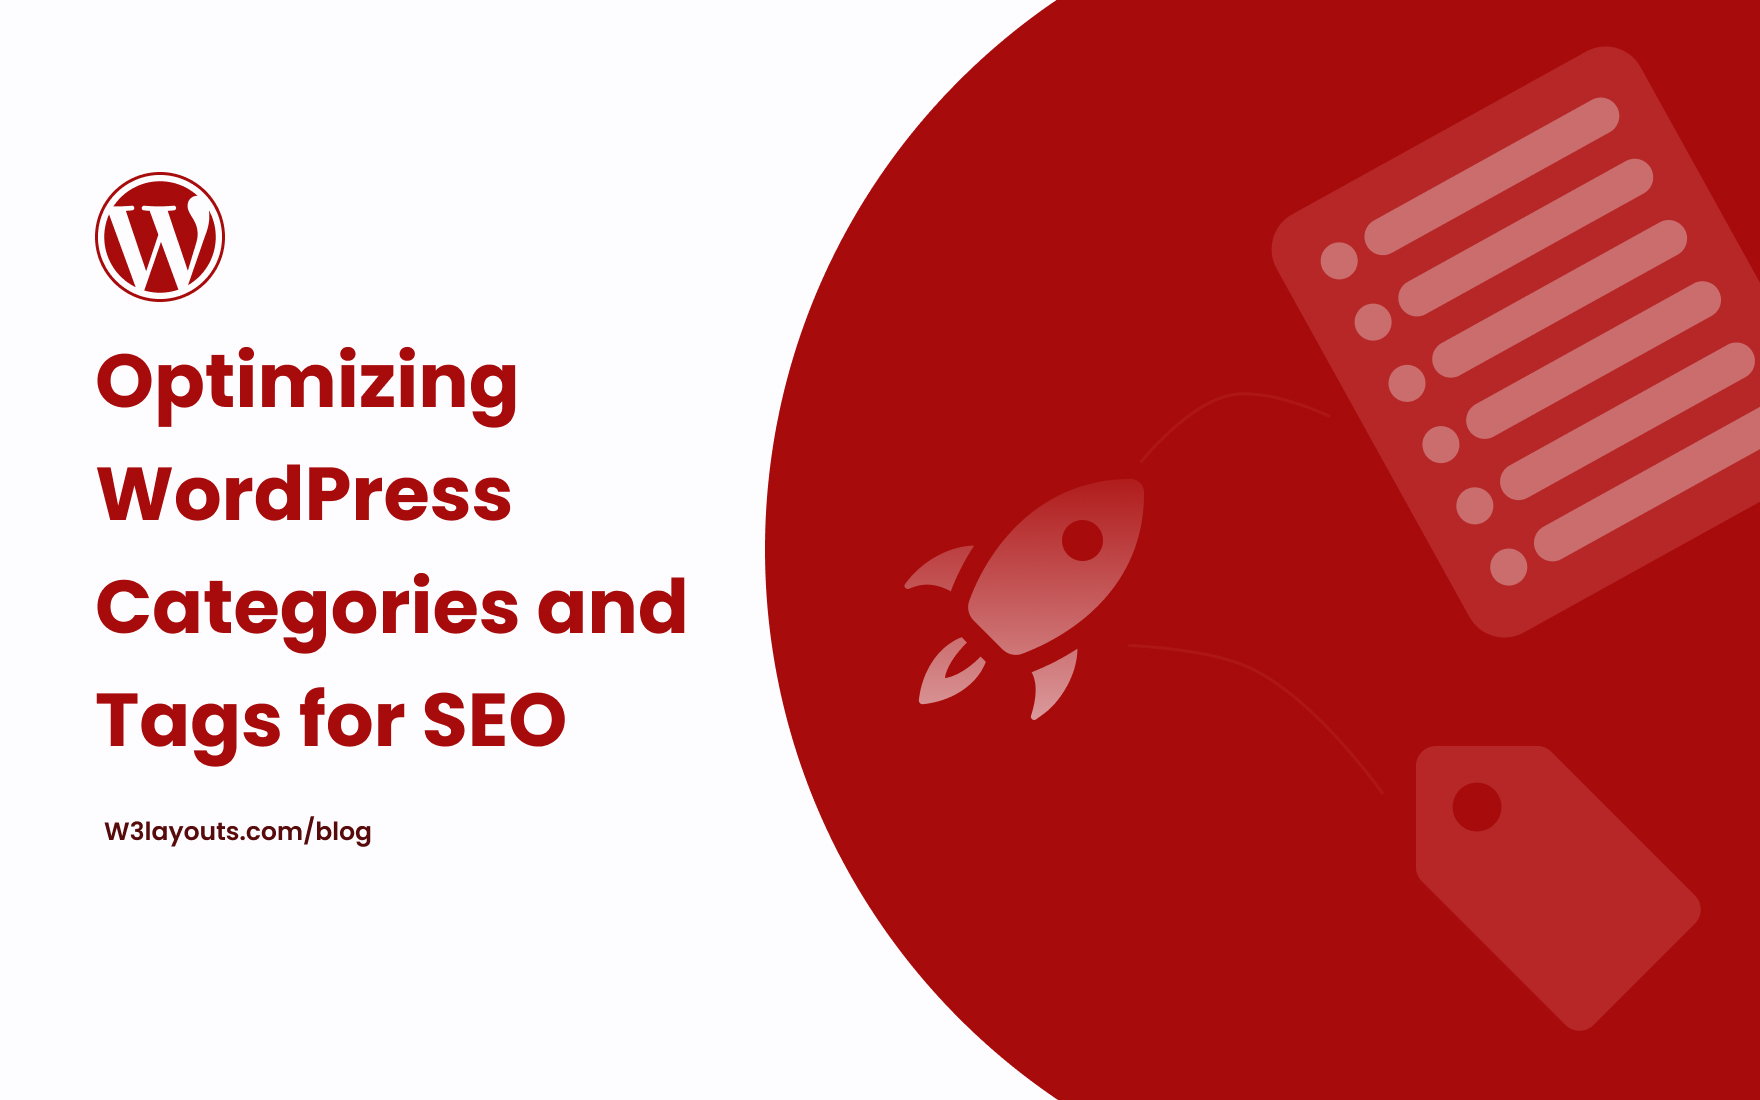 Optimizing WordPress Categories and Tags for SEO